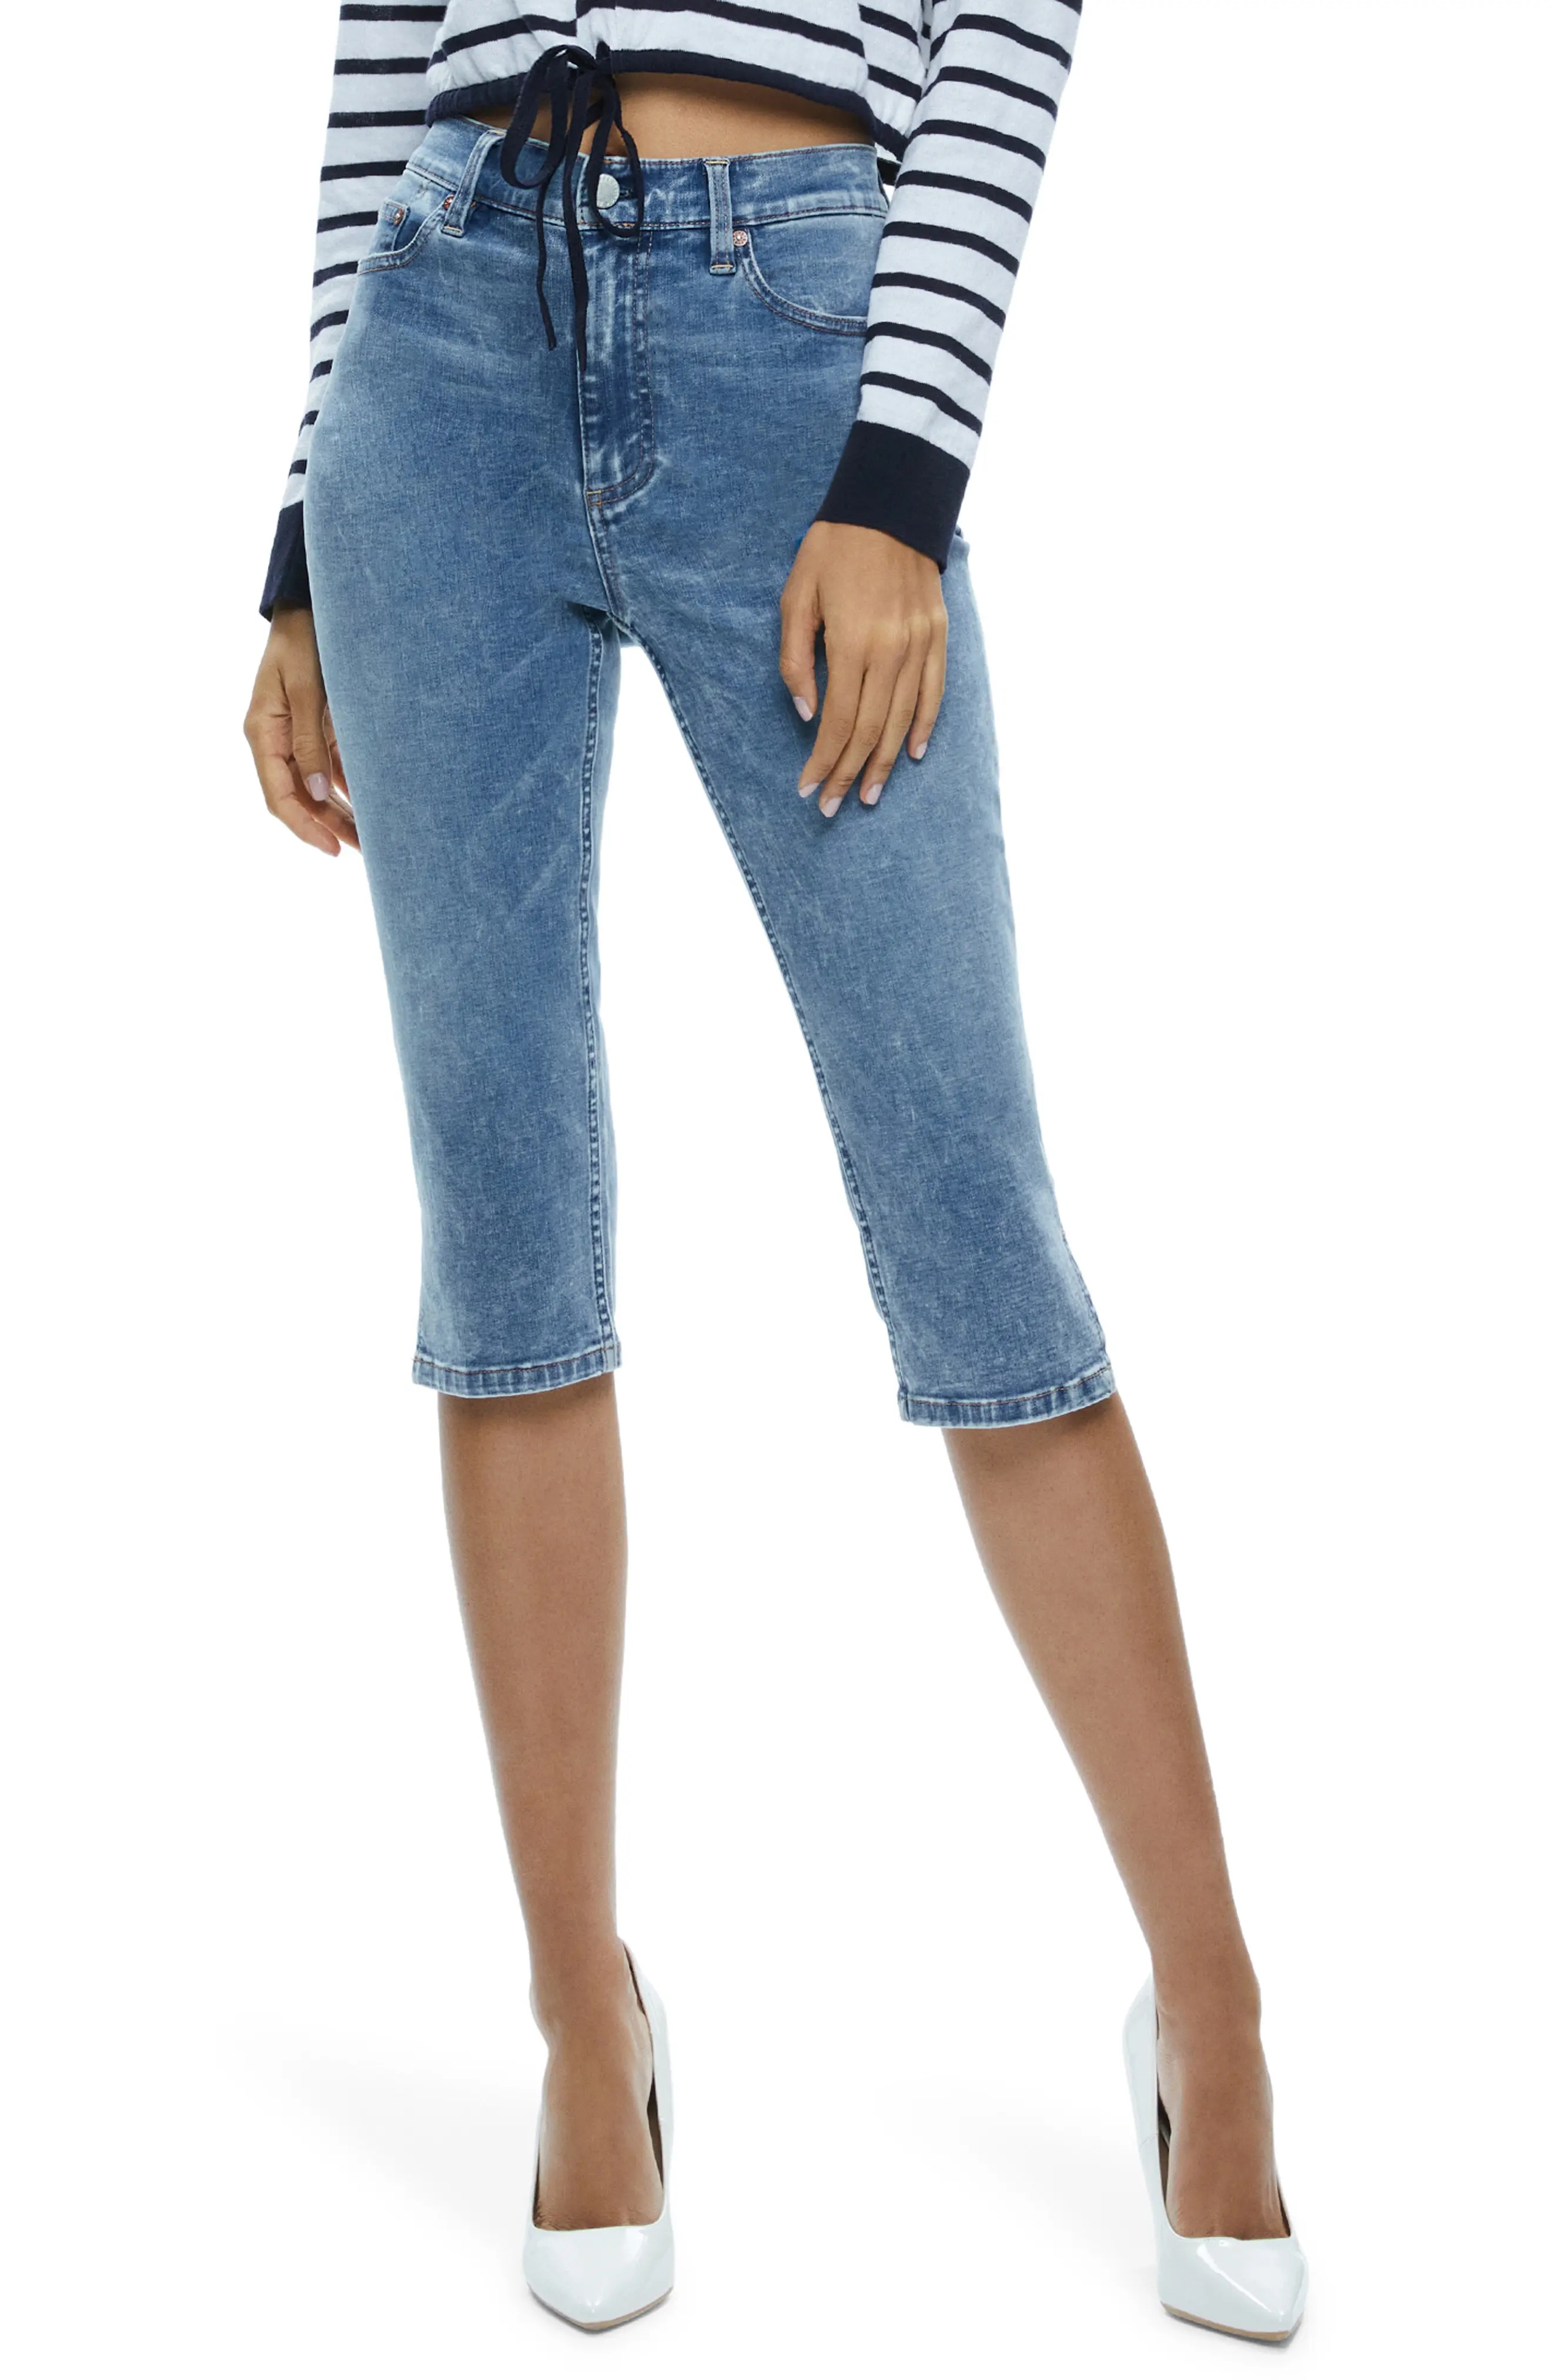 Emmie Clamdigger Jeans - 1